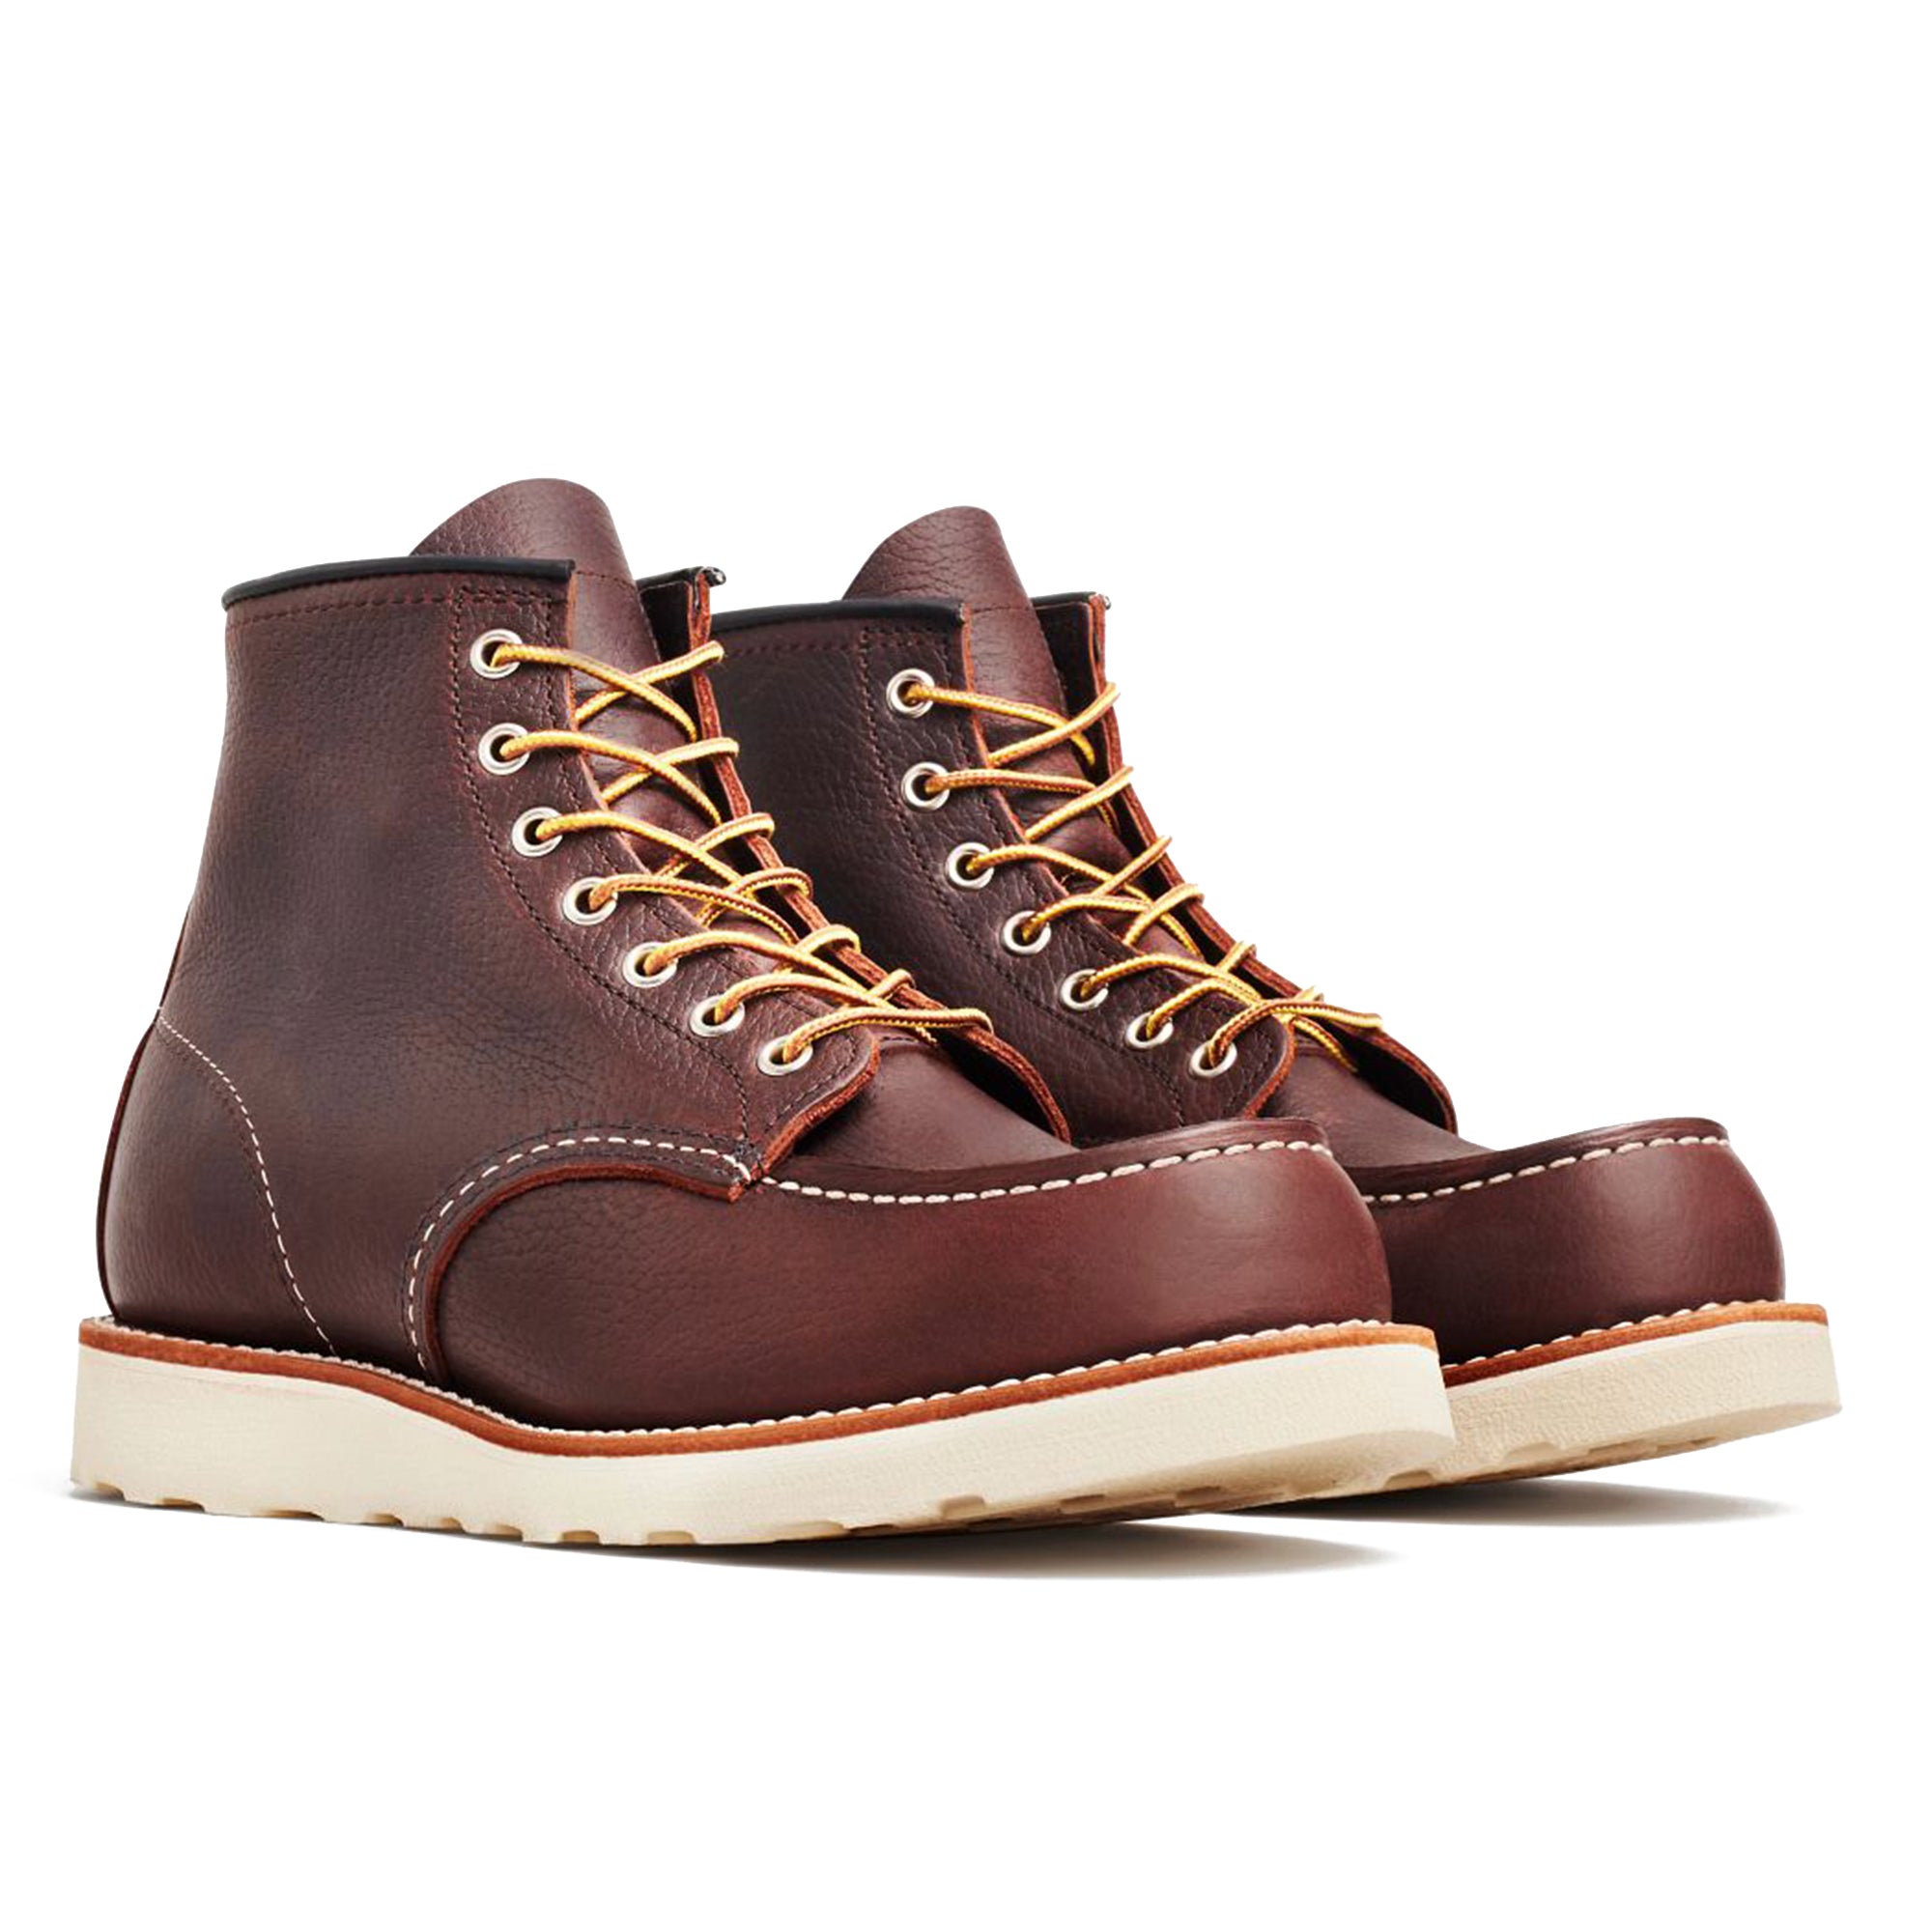 Red Wing 8138  6" Moc Toe Leather Boot - Briar Oil Slick Brown